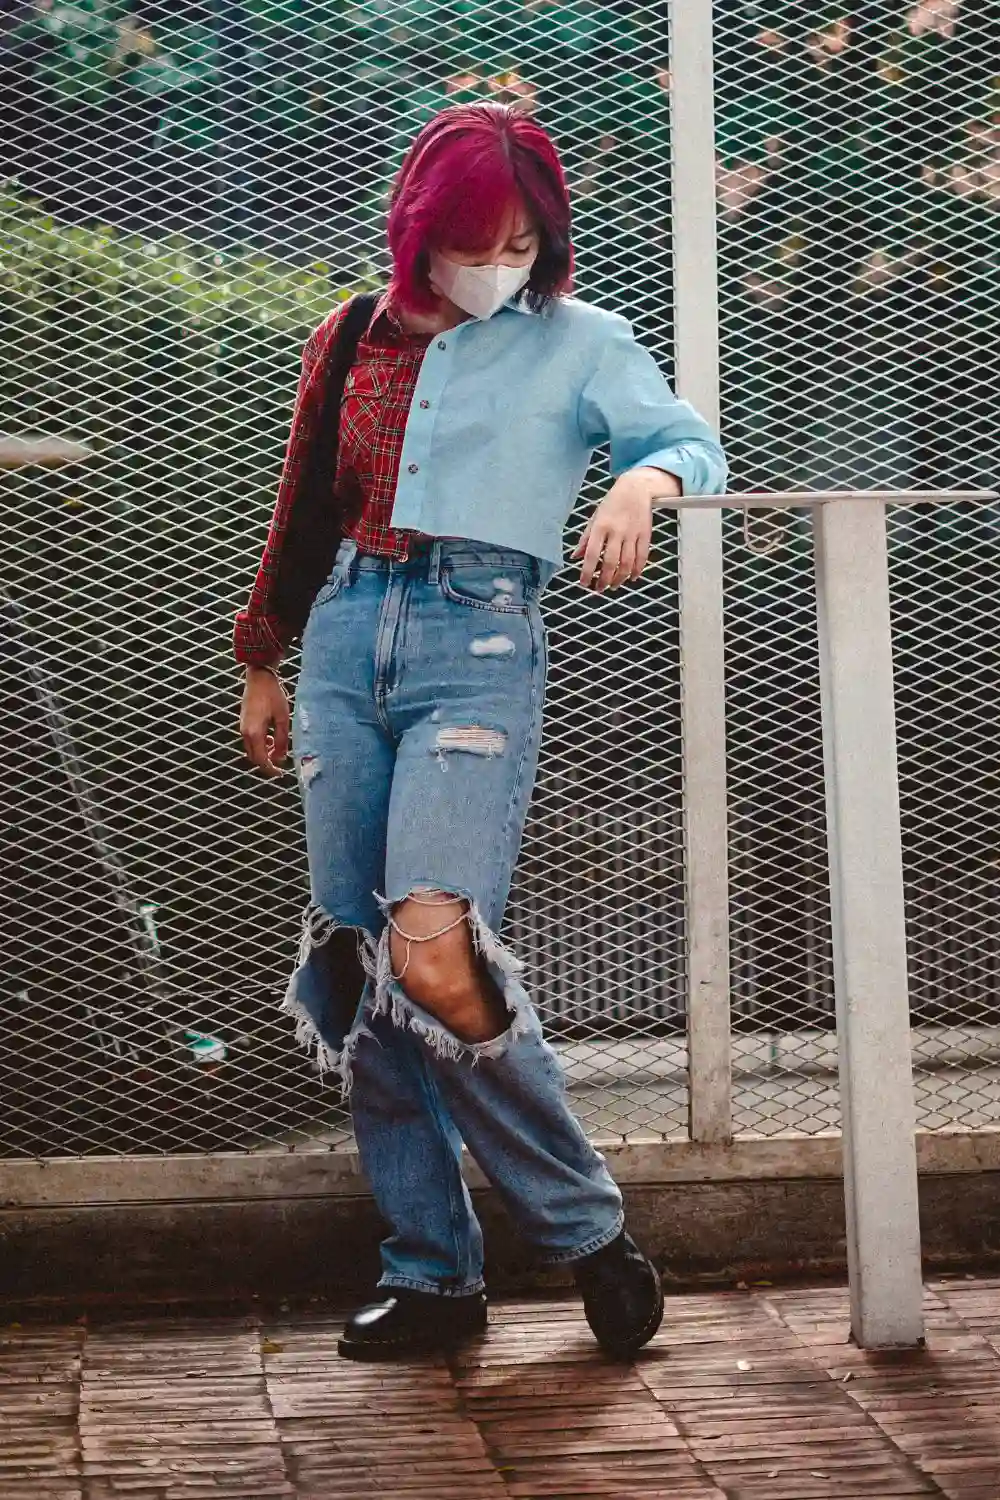 Woman in Ripped Denim Jeans Leaning on a Metal Post